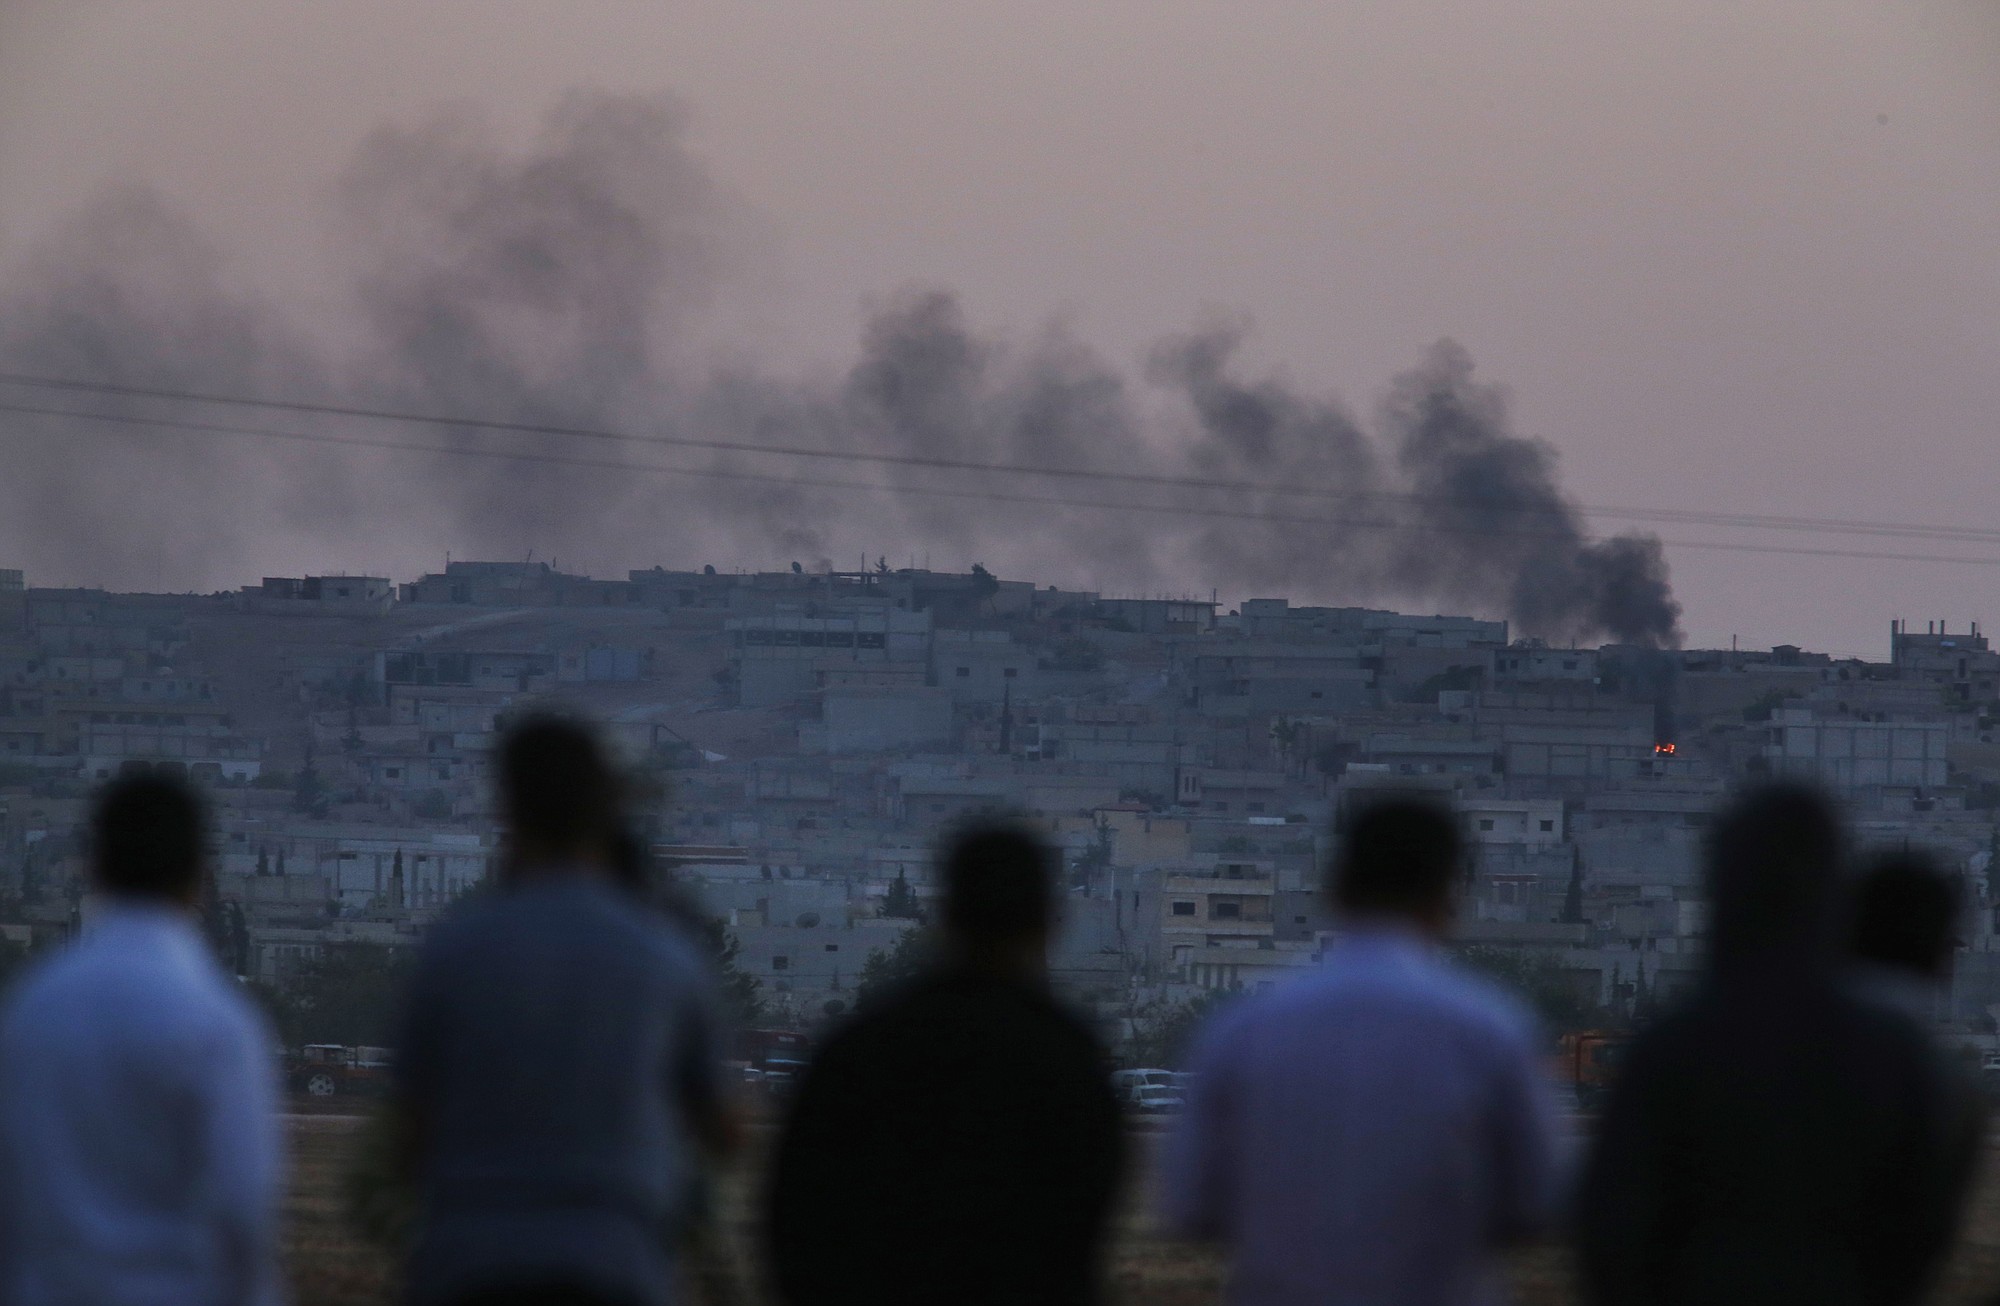 Turkish Kurds standing in the outskirts of Suruc, on the Turkey-Syria border, watch as smoke rises from a fire following an airstrike in Kobani, Syria, where the fighting between militants of the Islamic State group and Kurdish forces intensified on Tuesday.